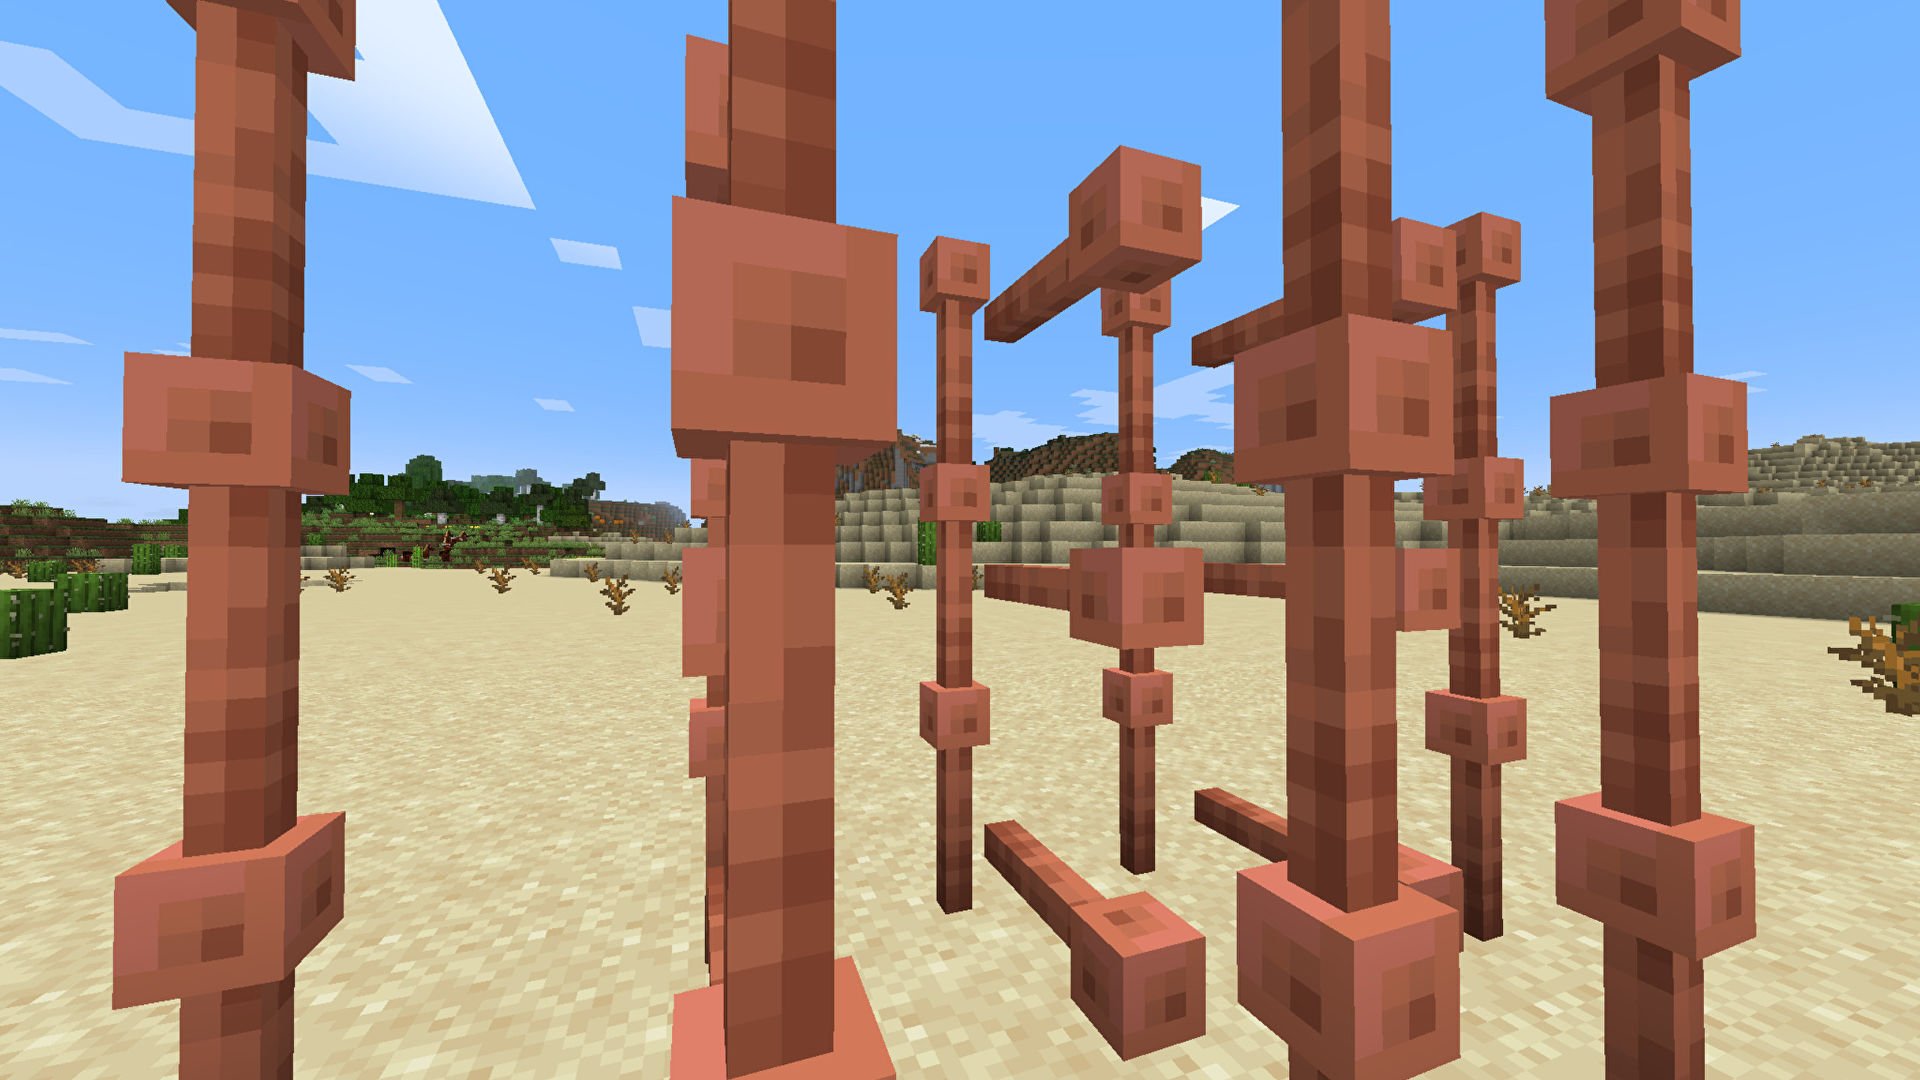 Minecraft Lightning Rod: how to make and use it